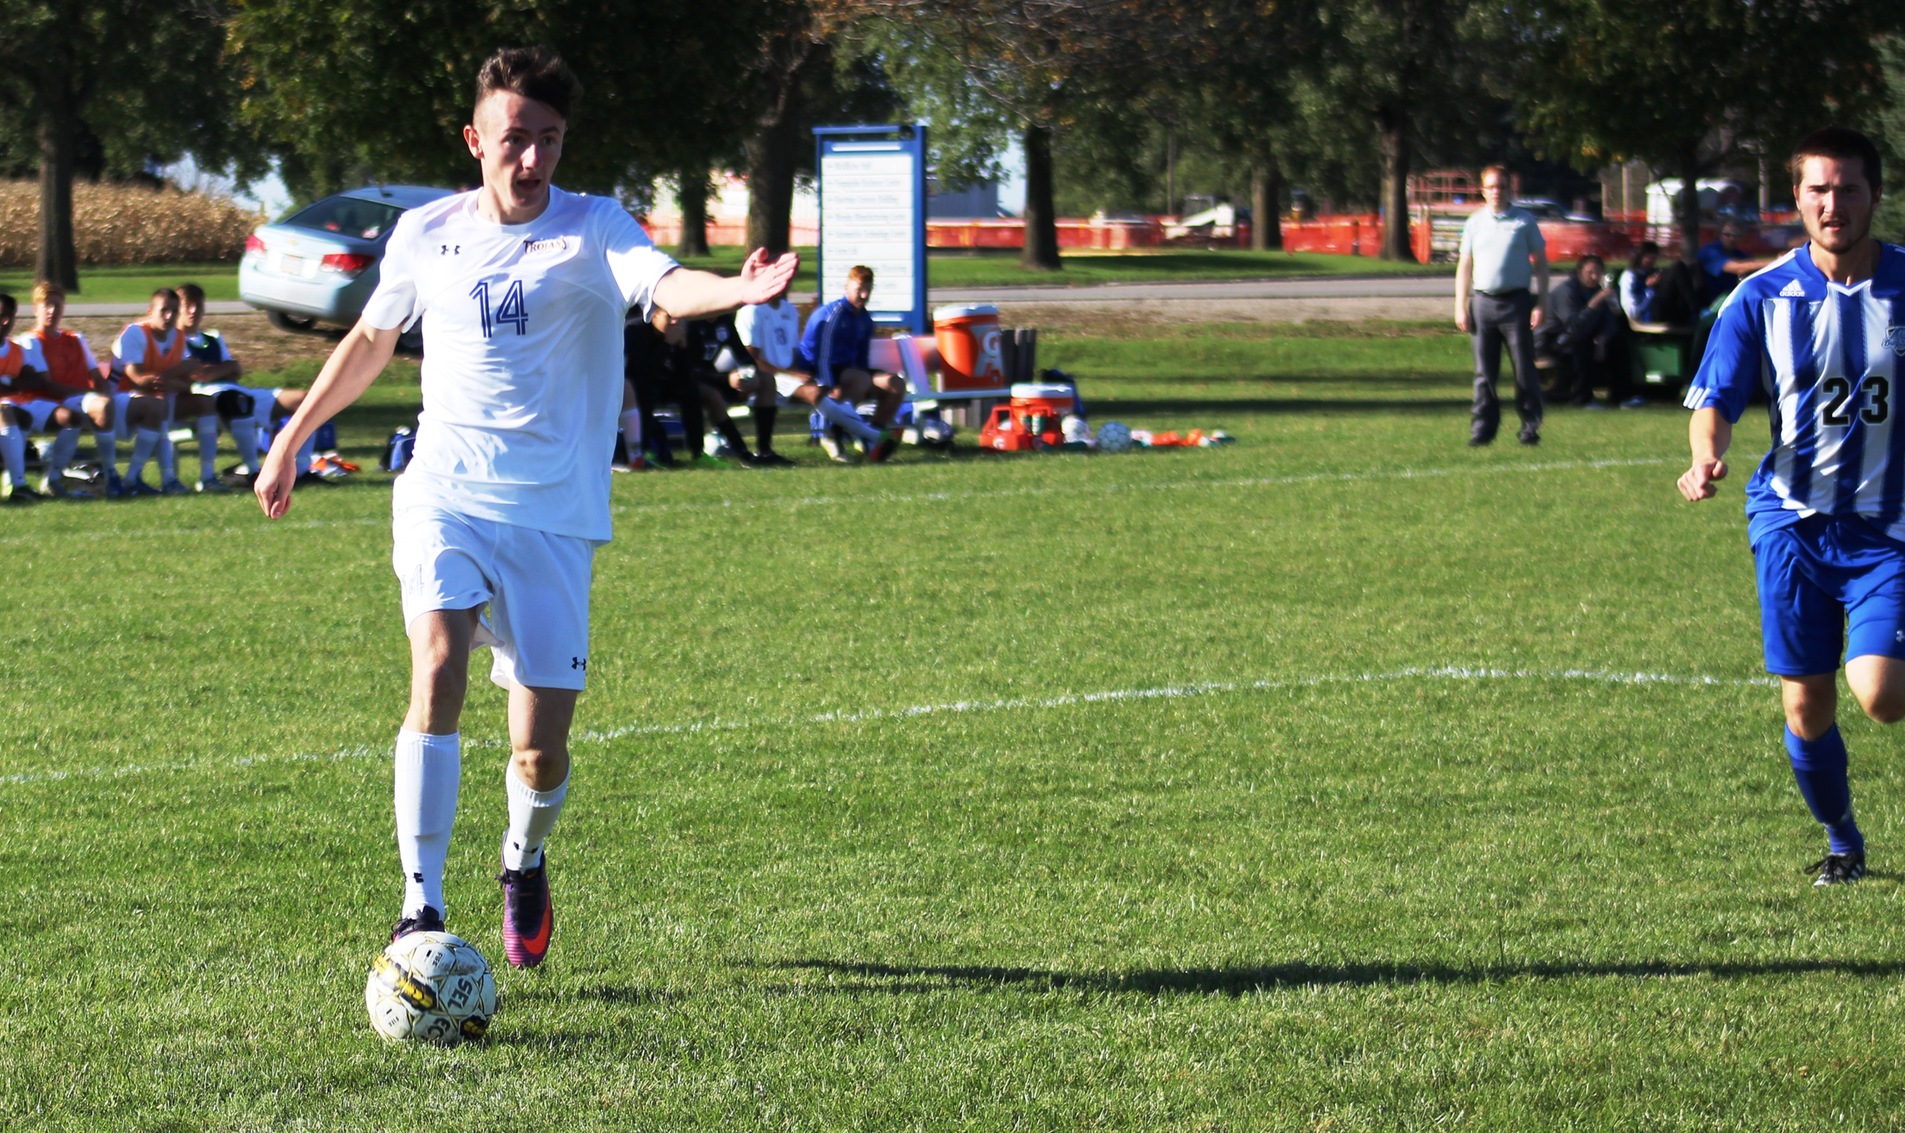 NIACC's Jack Doyle controls the ball in last week's match against DCTC.